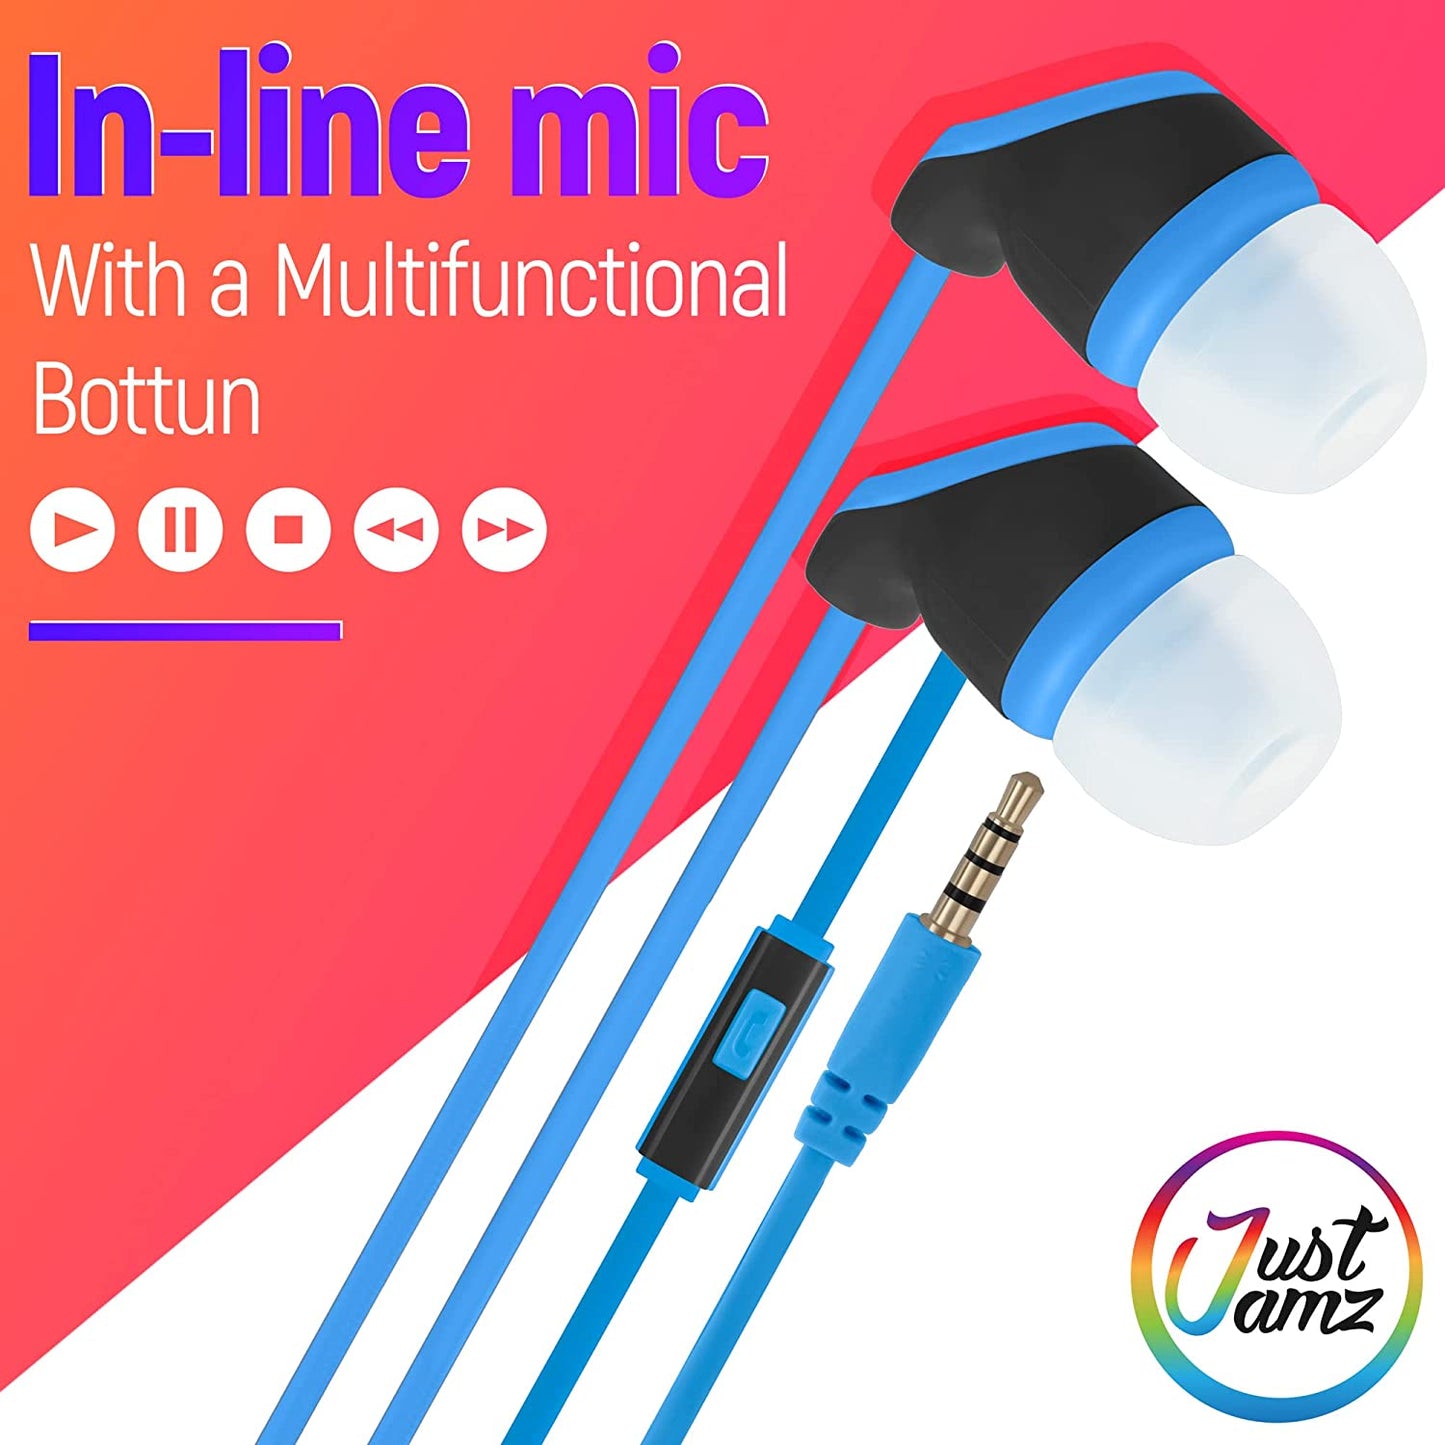 JustJamz® Kidz | 10 Pack | Earbuds with Microphone | Disposable Earphones | Call with Mic | Stereo Headphones | Bulk Earbuds for Schools, Kids, Classrooms & Libraries | Mixed Colors